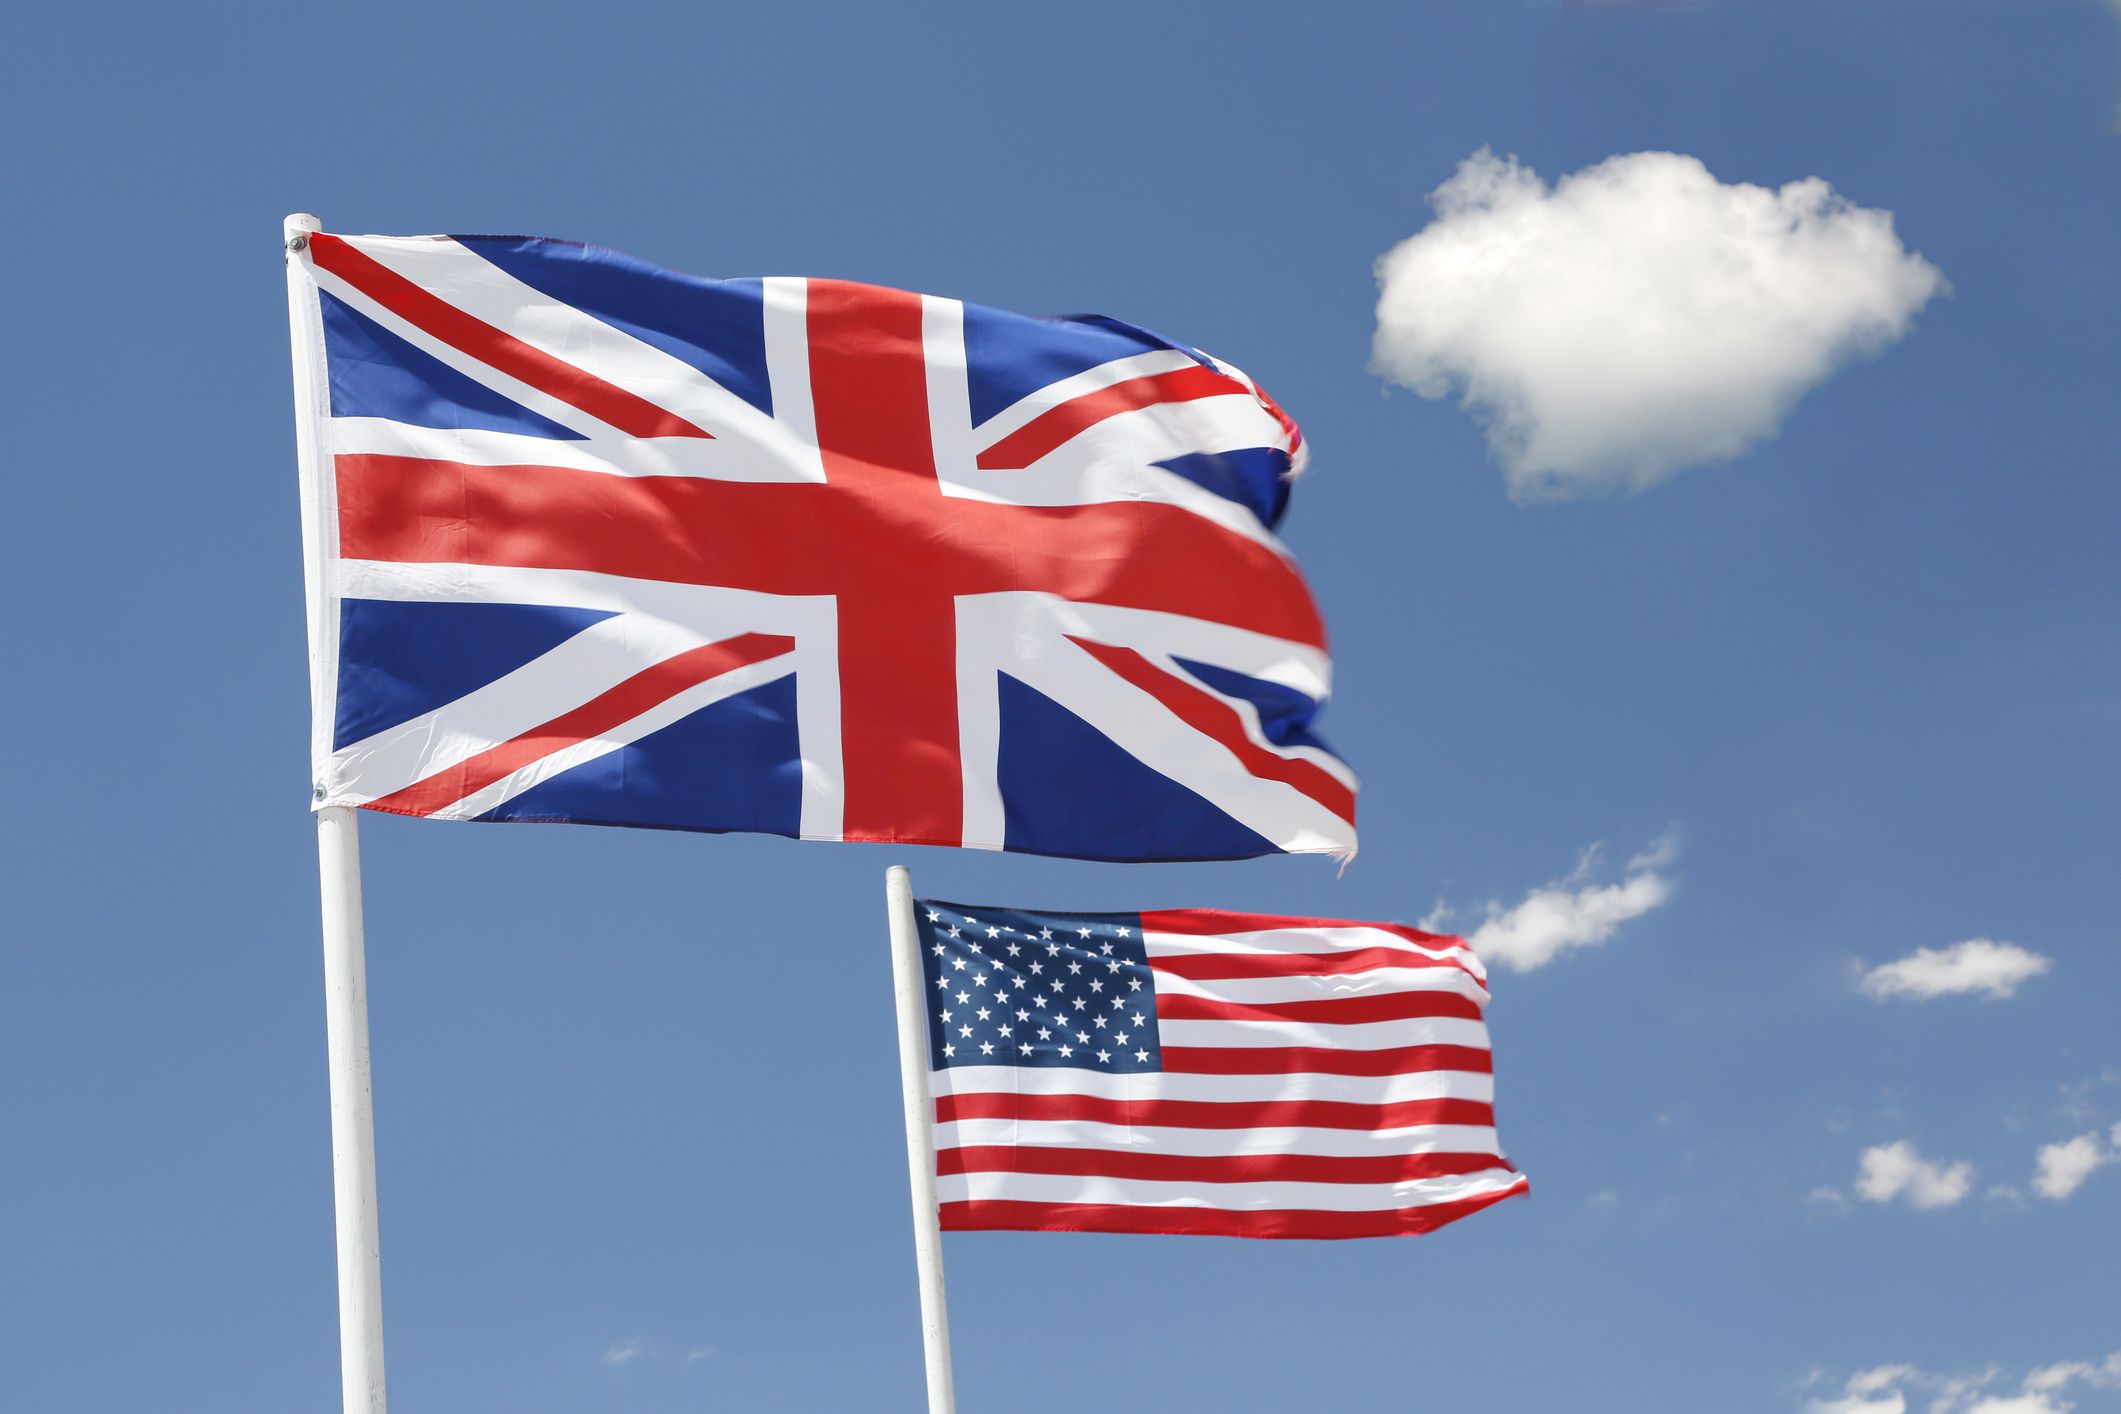 Does America own Britain?